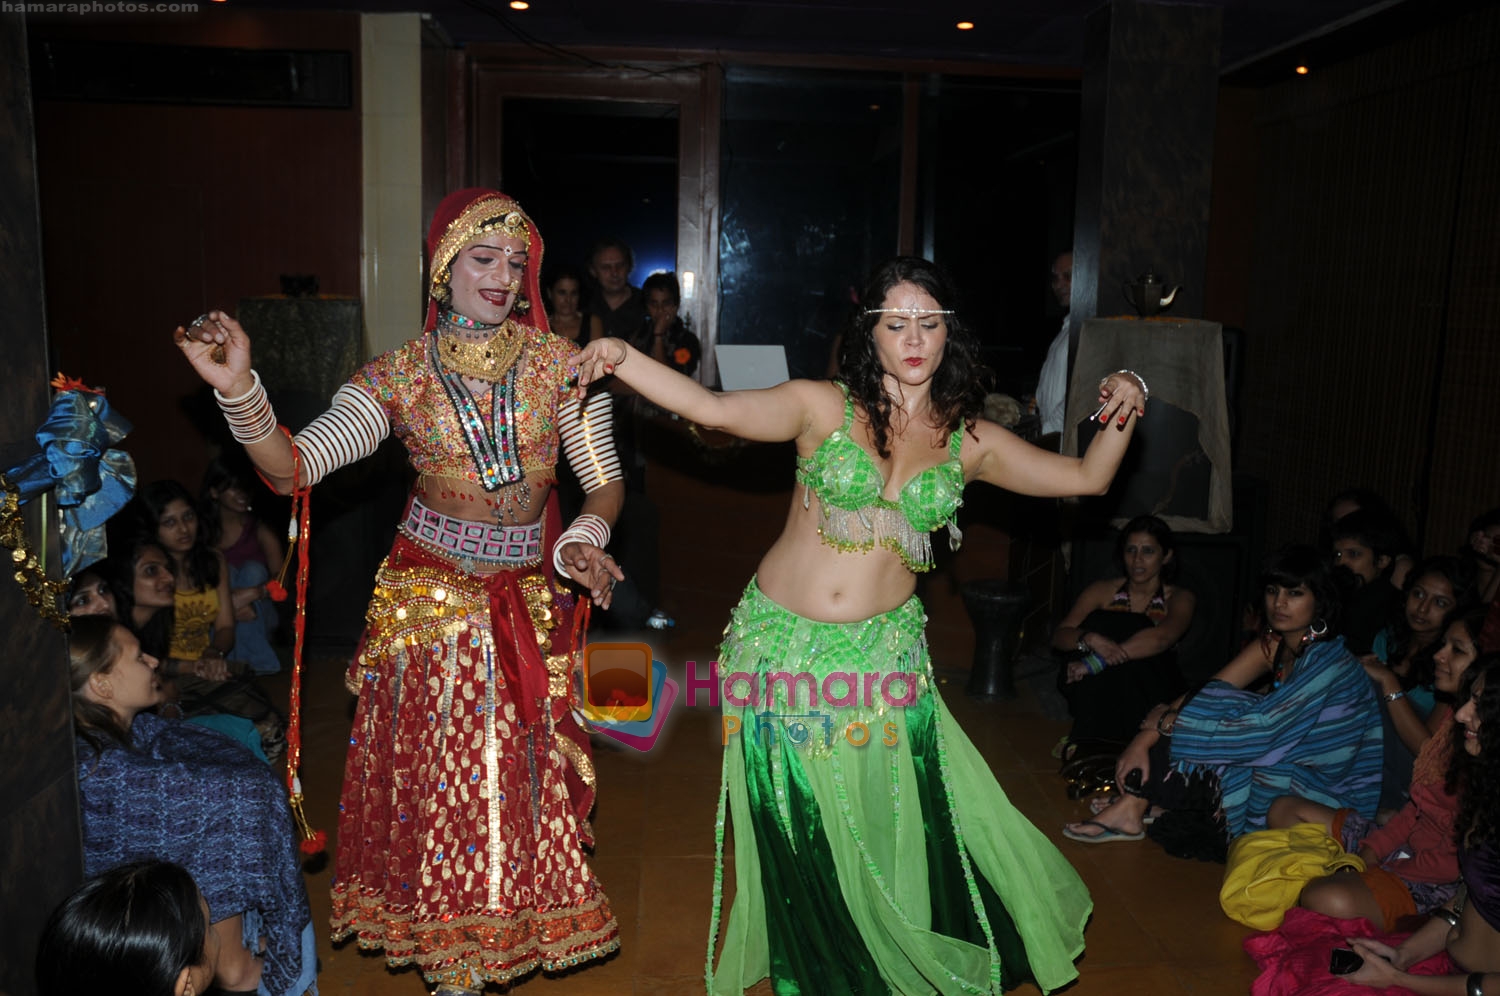 Queen Harish & Veronica at Bollywood & Bellydance mixed evening with Queen Harish & Veronica in Zenzi on 3rd Feb 2009